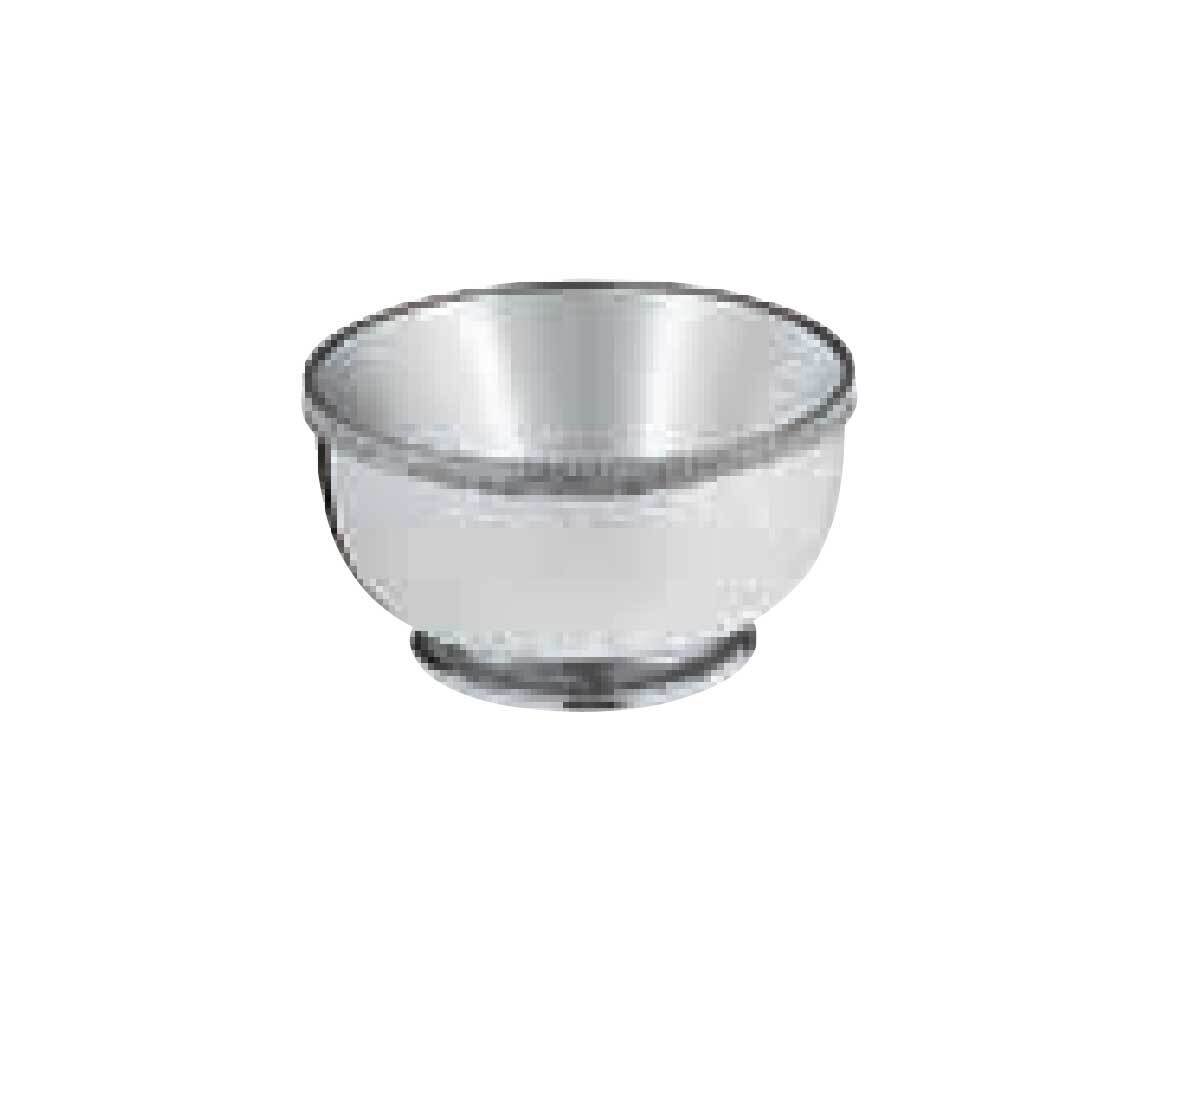 Ercuis Fleurs Small Cup 2 Inch Silver Plated F51F281-11